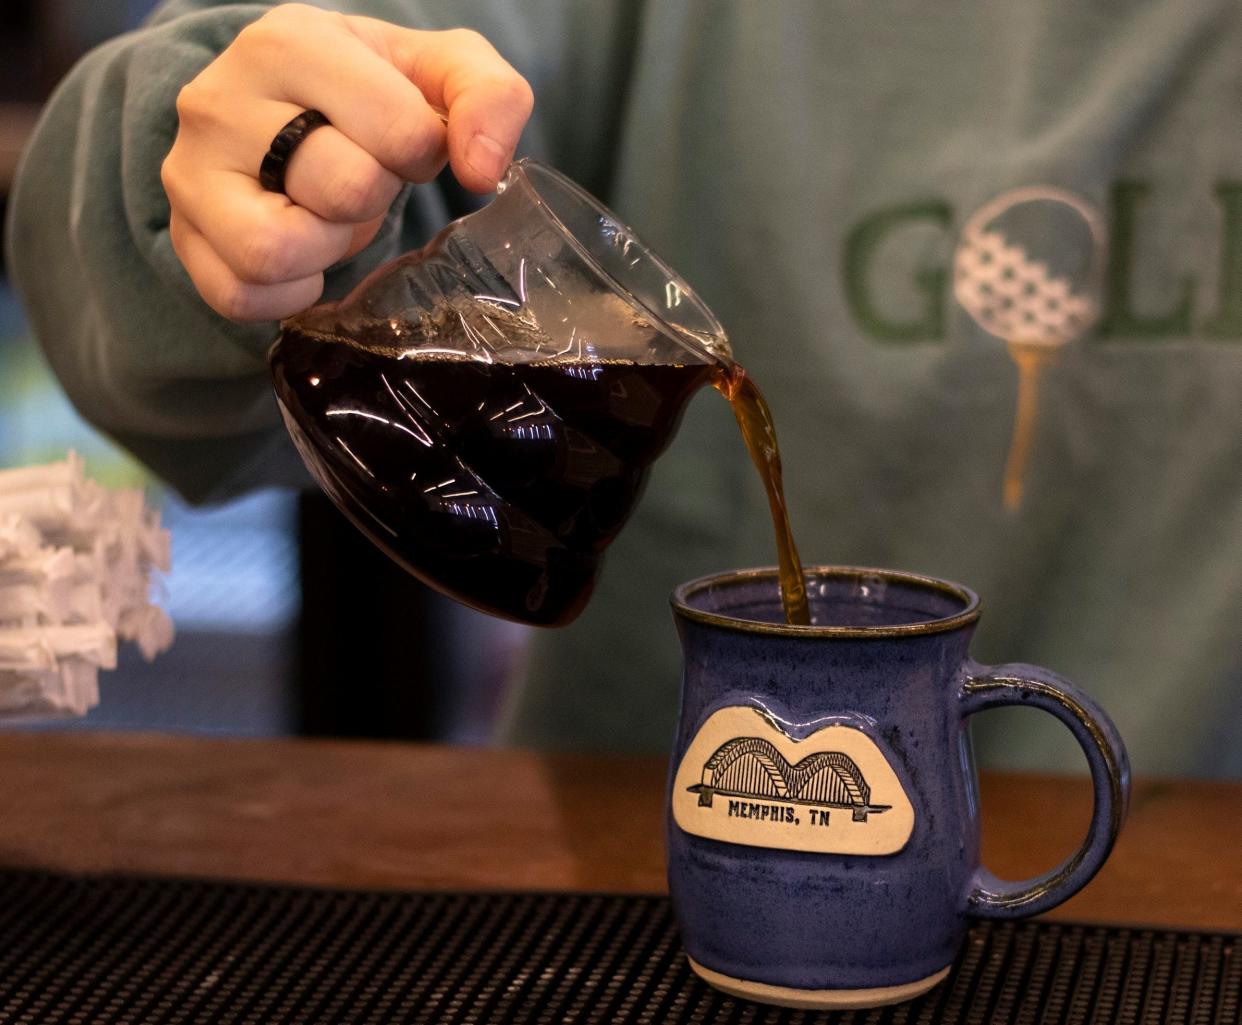 A barista at Belltower Coffeehouse and Studio in Memphis pours a cup of coffee into a mug. Belltower is known for its craft coffee drinks, creative fare, wine bar and pottery studio.